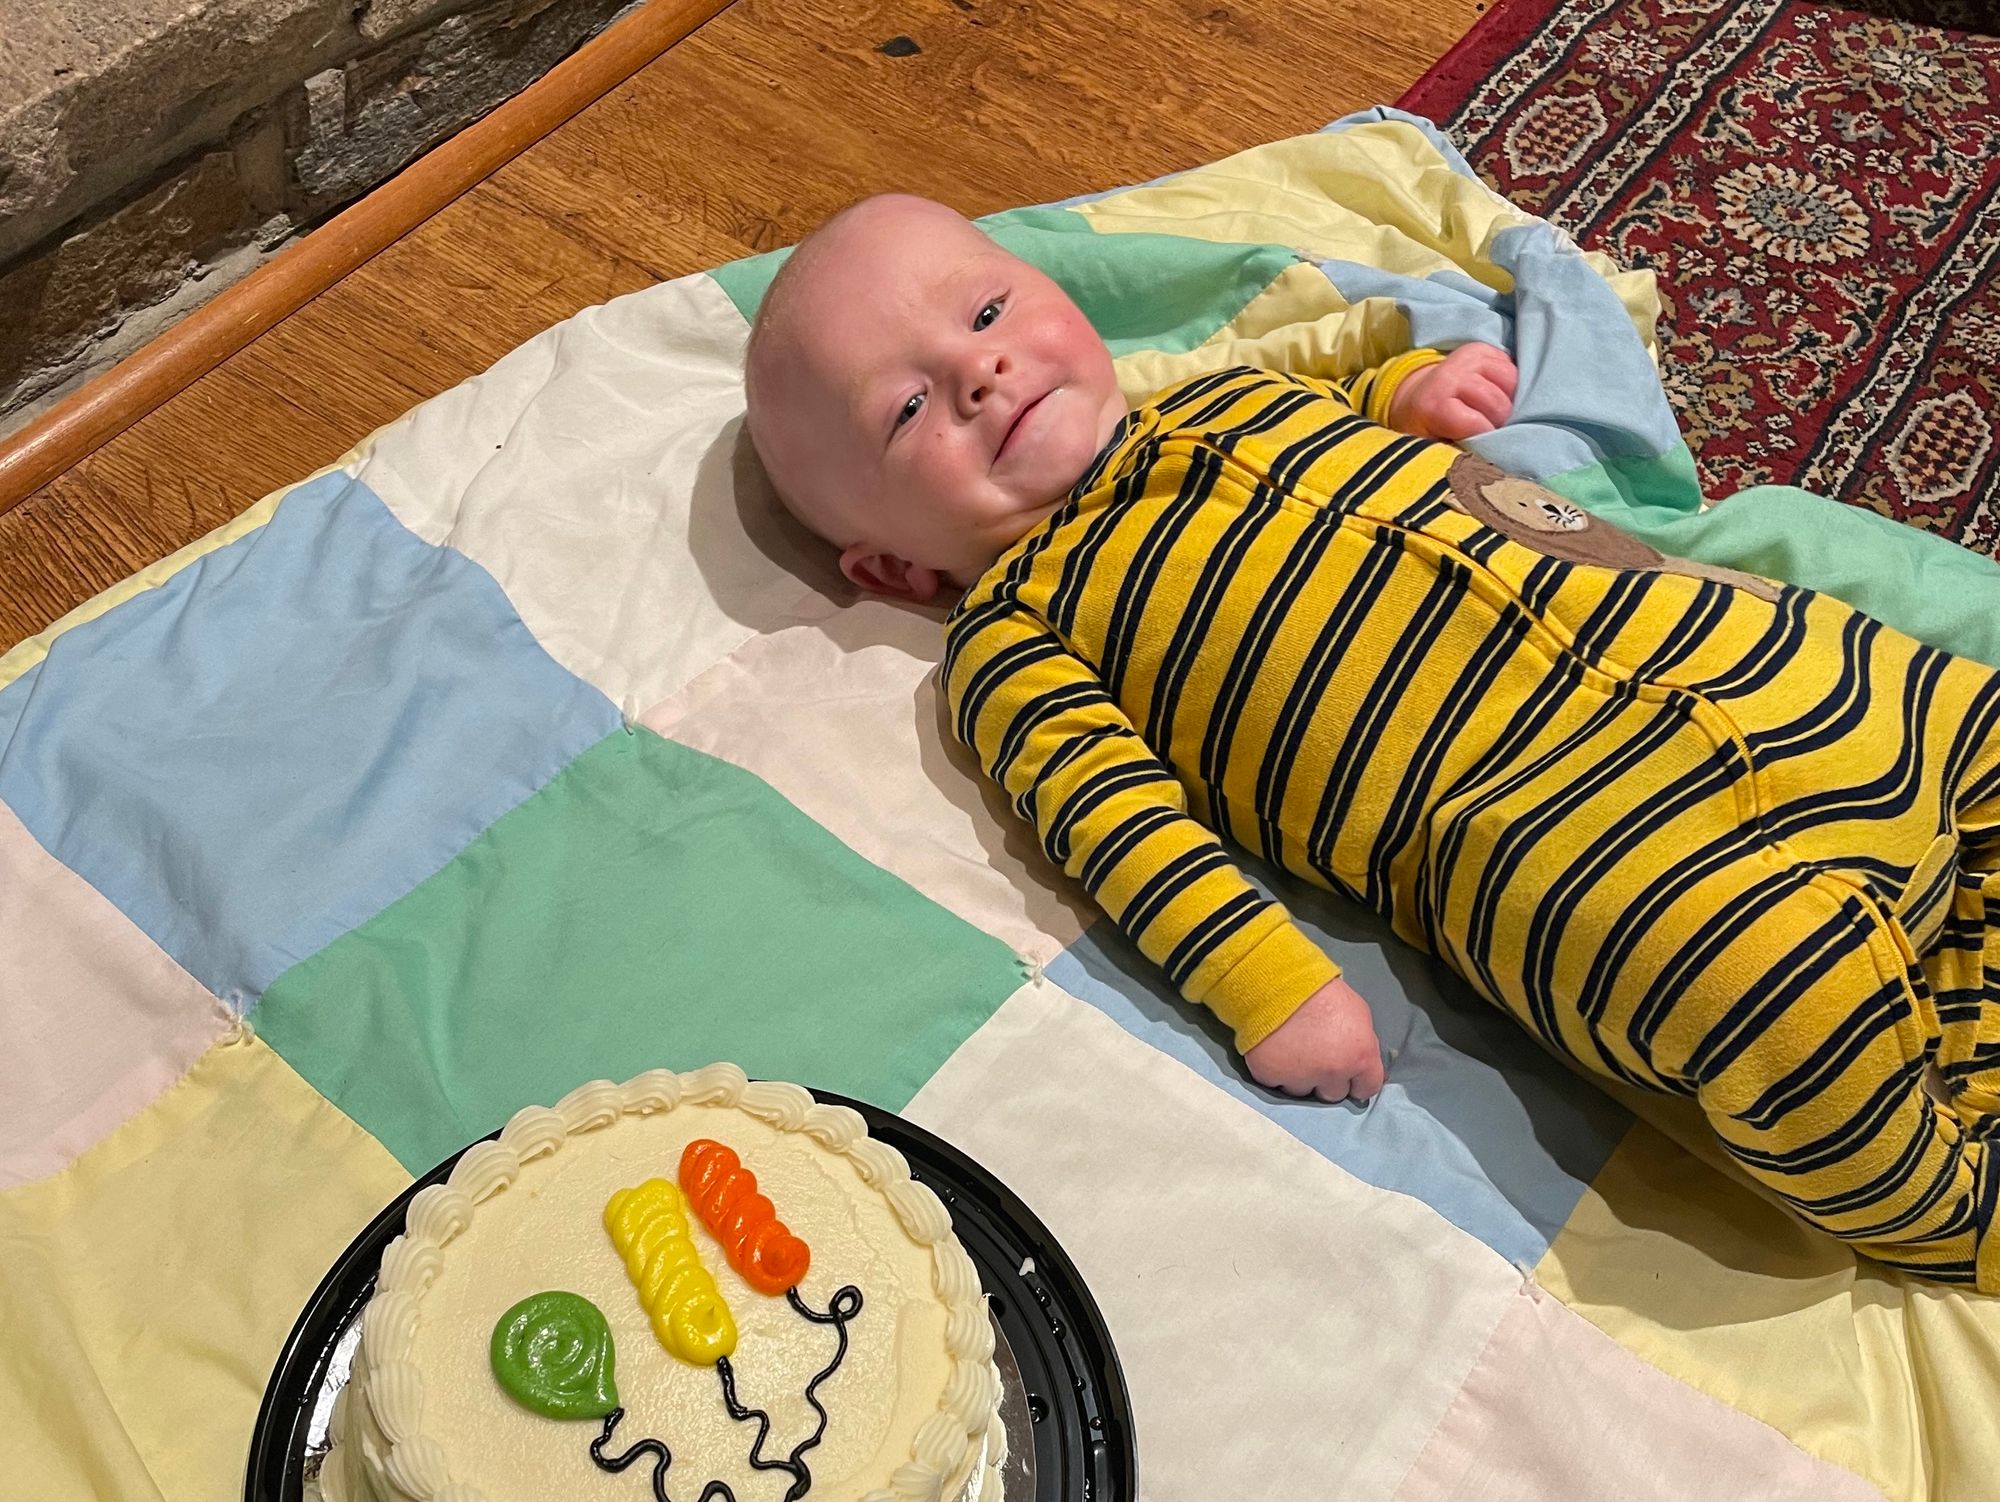 Freddie in a striped-yellow pajama outfit, is next to a cake.